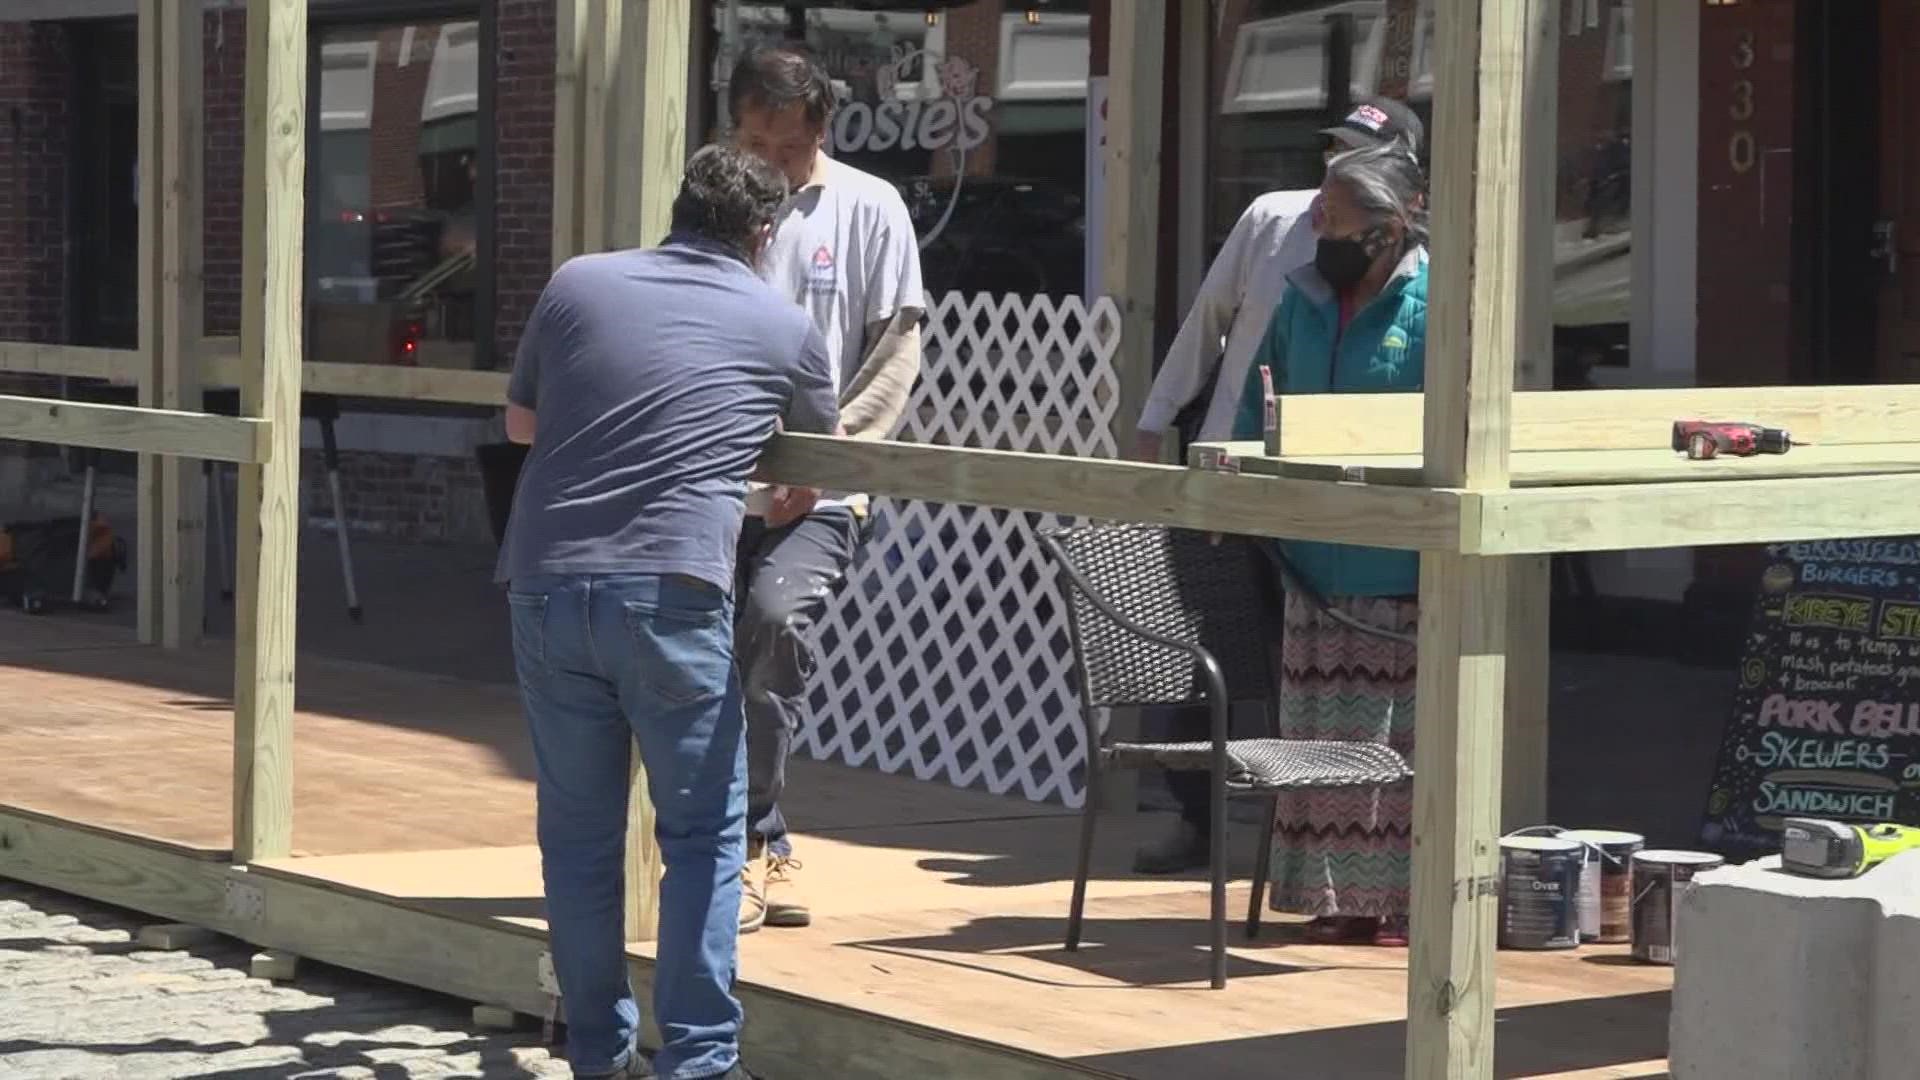 Business owners interested in having a parklet or two have to get a permit approved and abide by the city's rules and regulations.